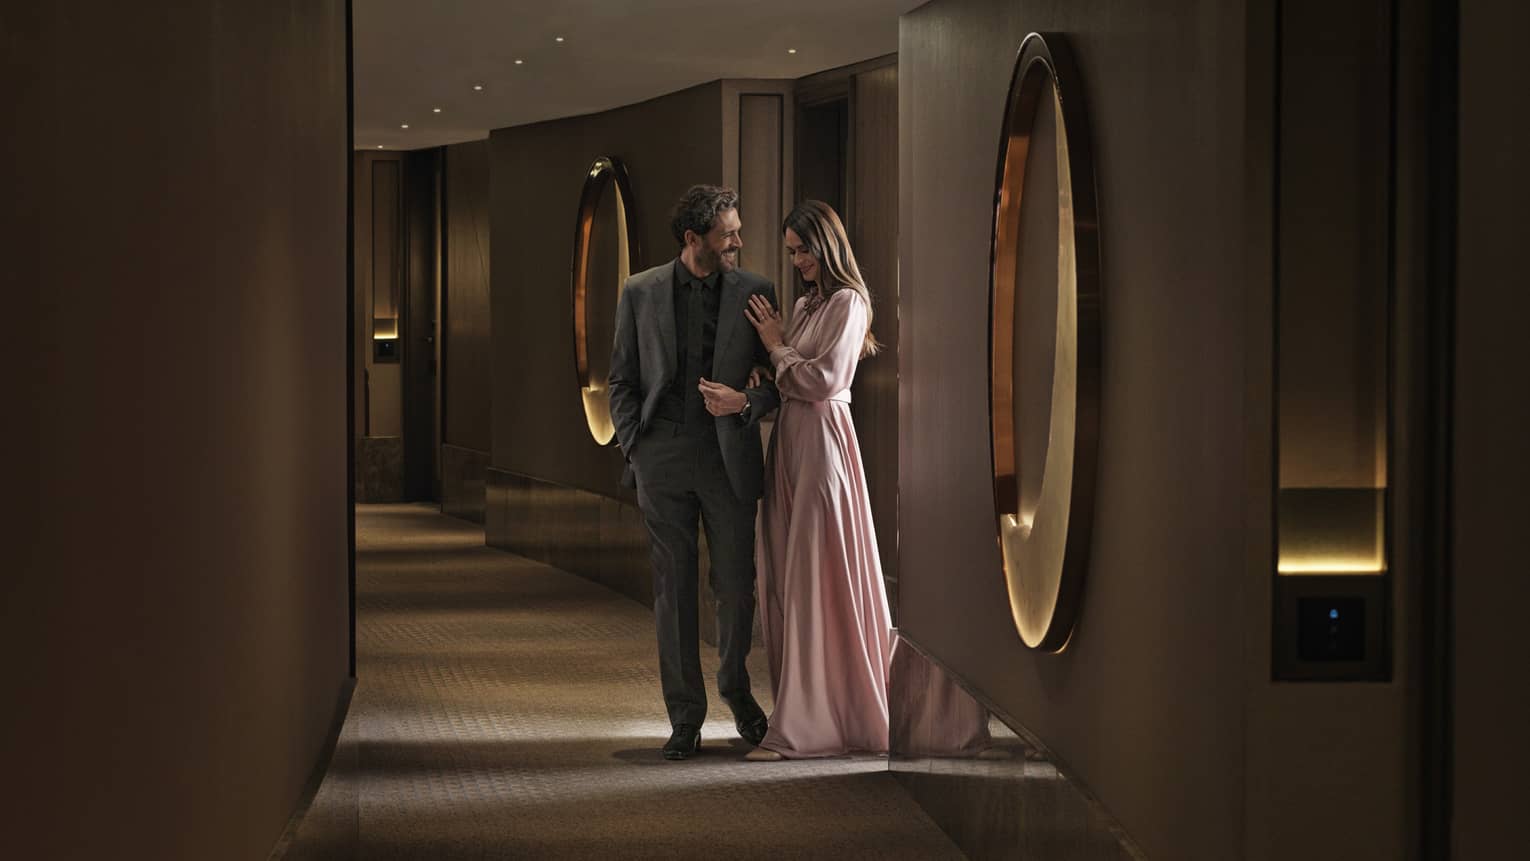 Smiling couple in formal wear stands in a dimly lit hall with oversized oval mirrors